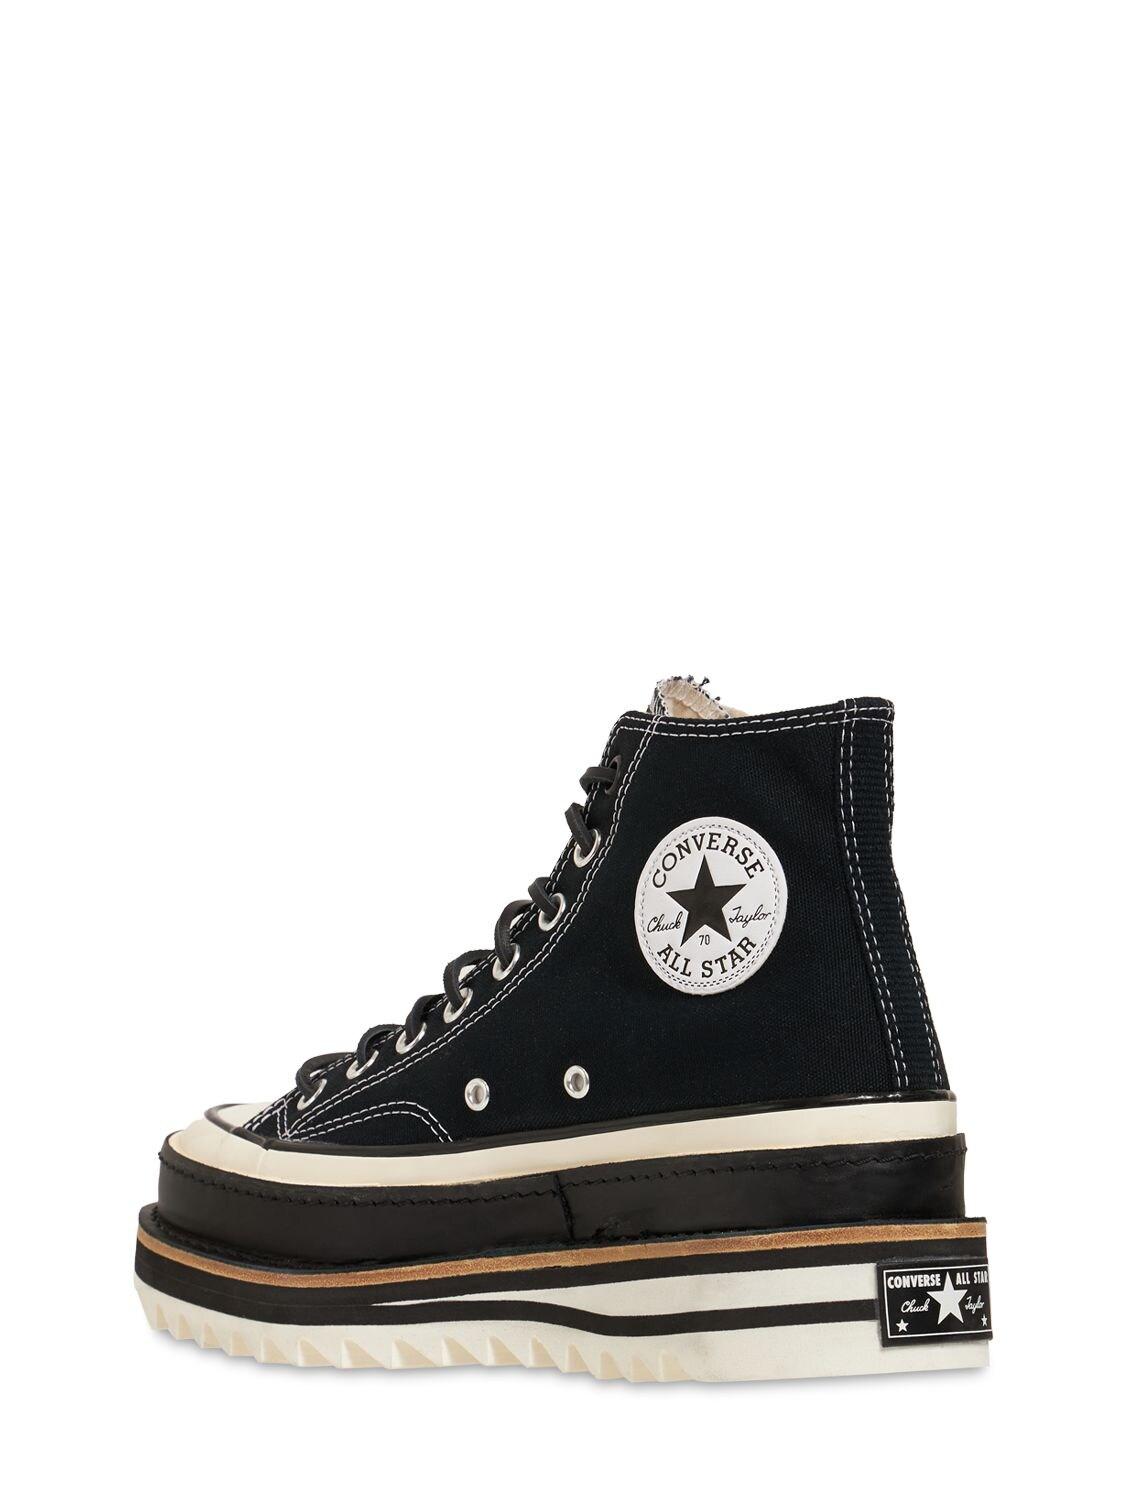 Converse Chuck Taylor 70 Crafted Trek Sneakers in Black | Lyst